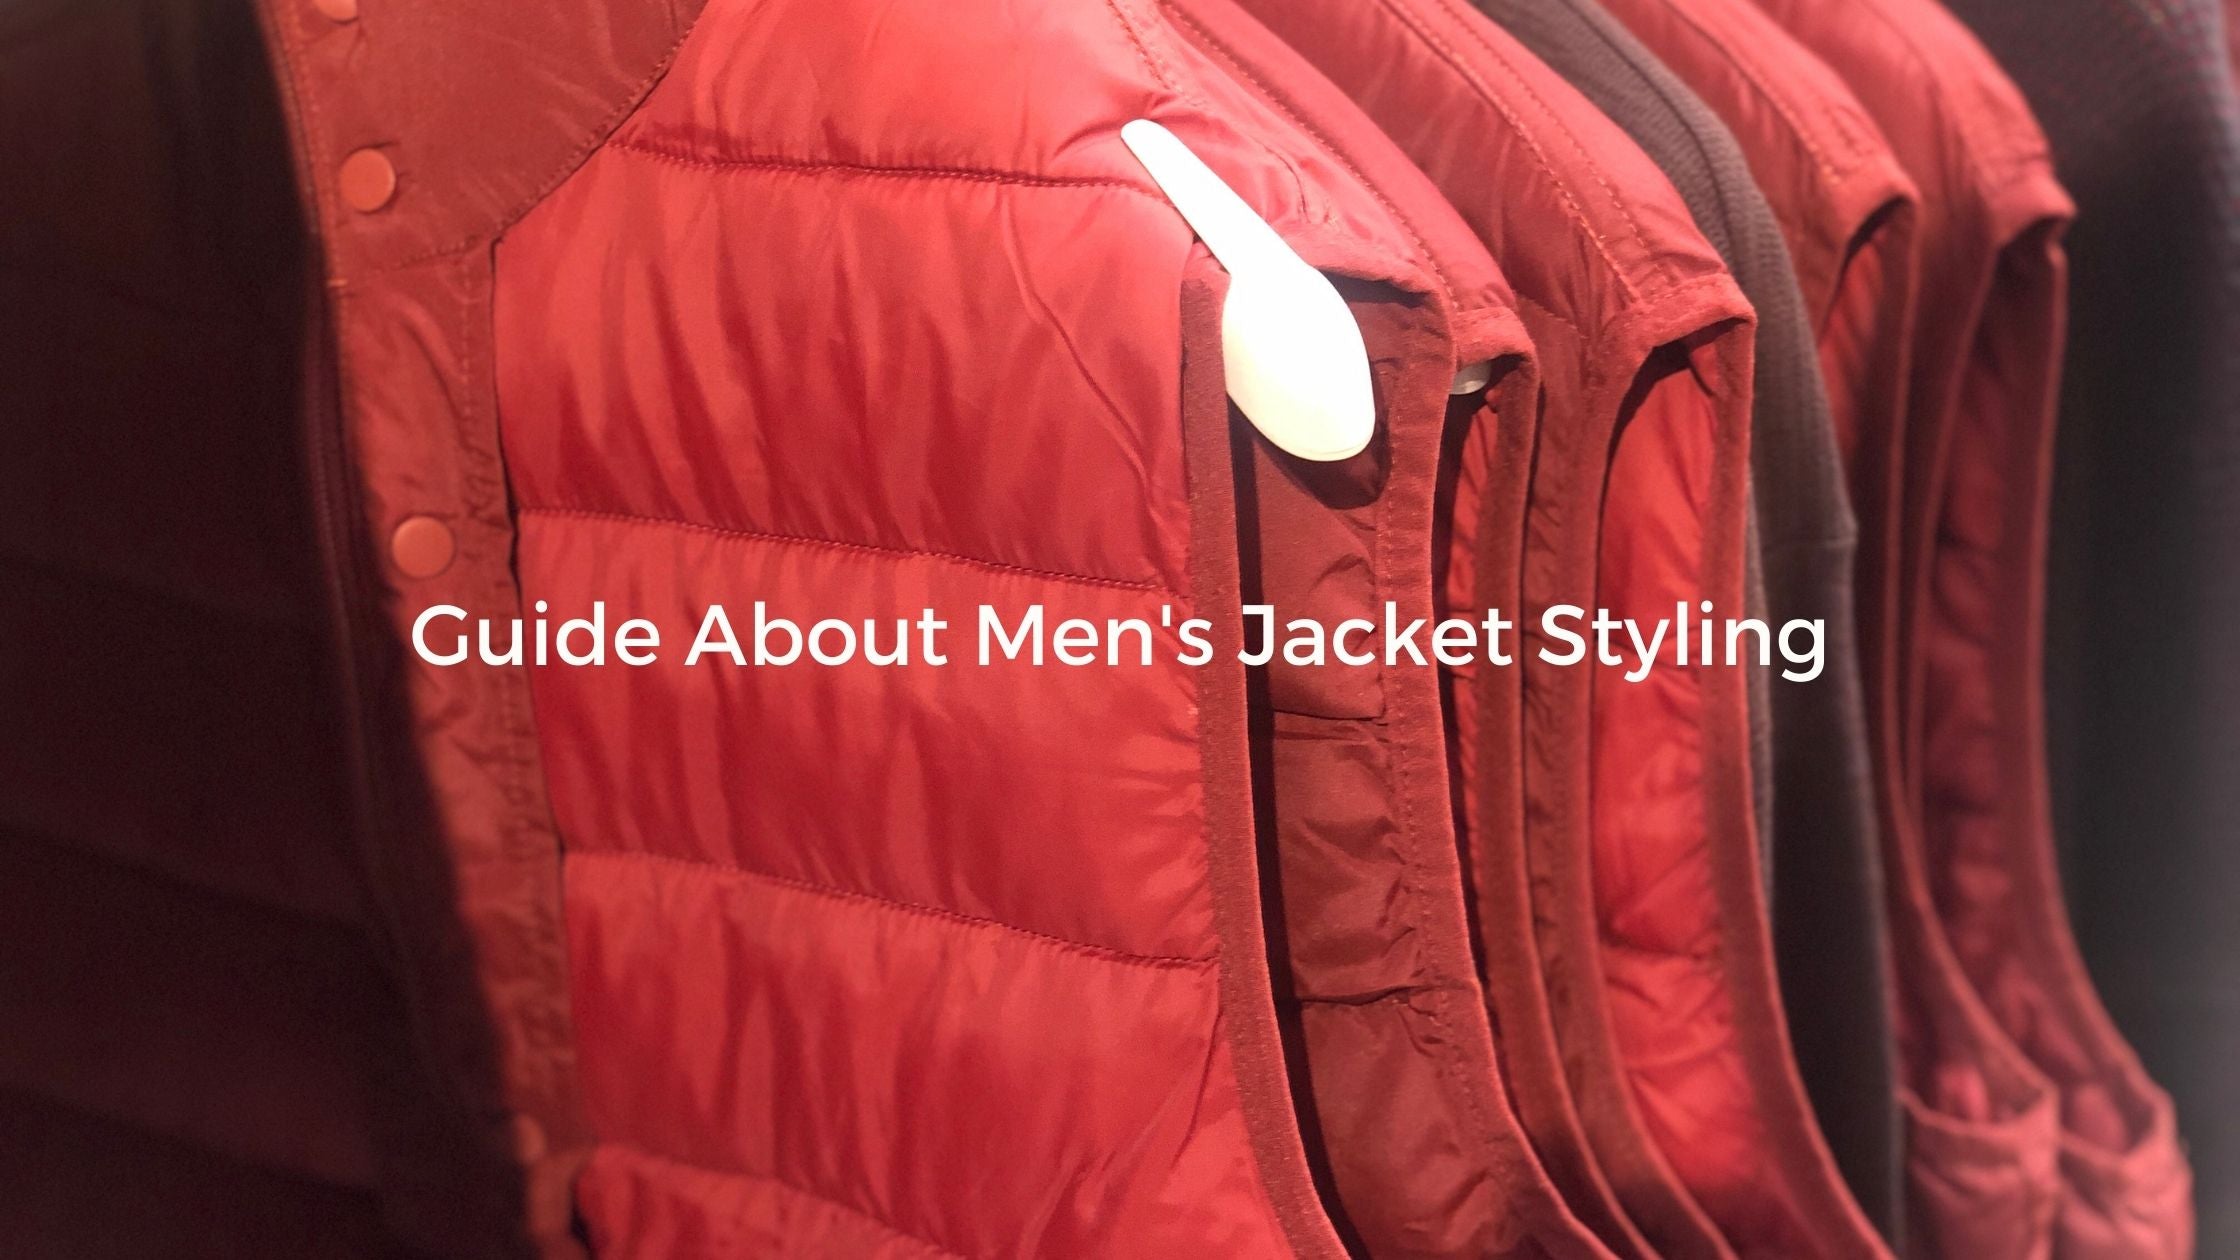 Guide About Men's Jacket Styling